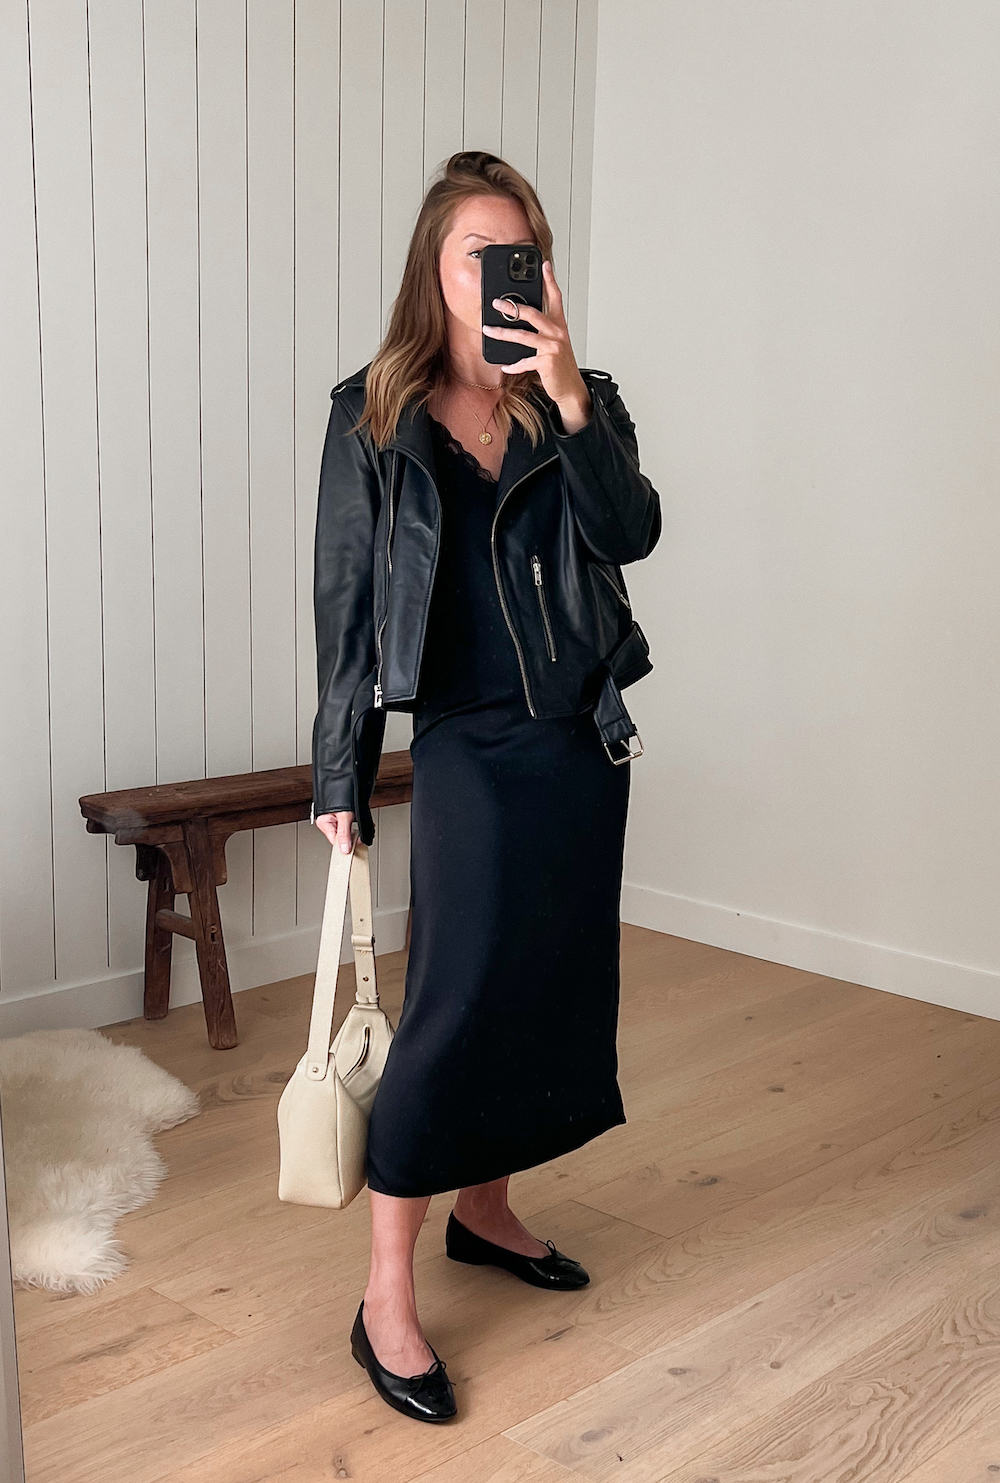 Christal wearing a black slip dress with black ballet flats and a black leather jacket.